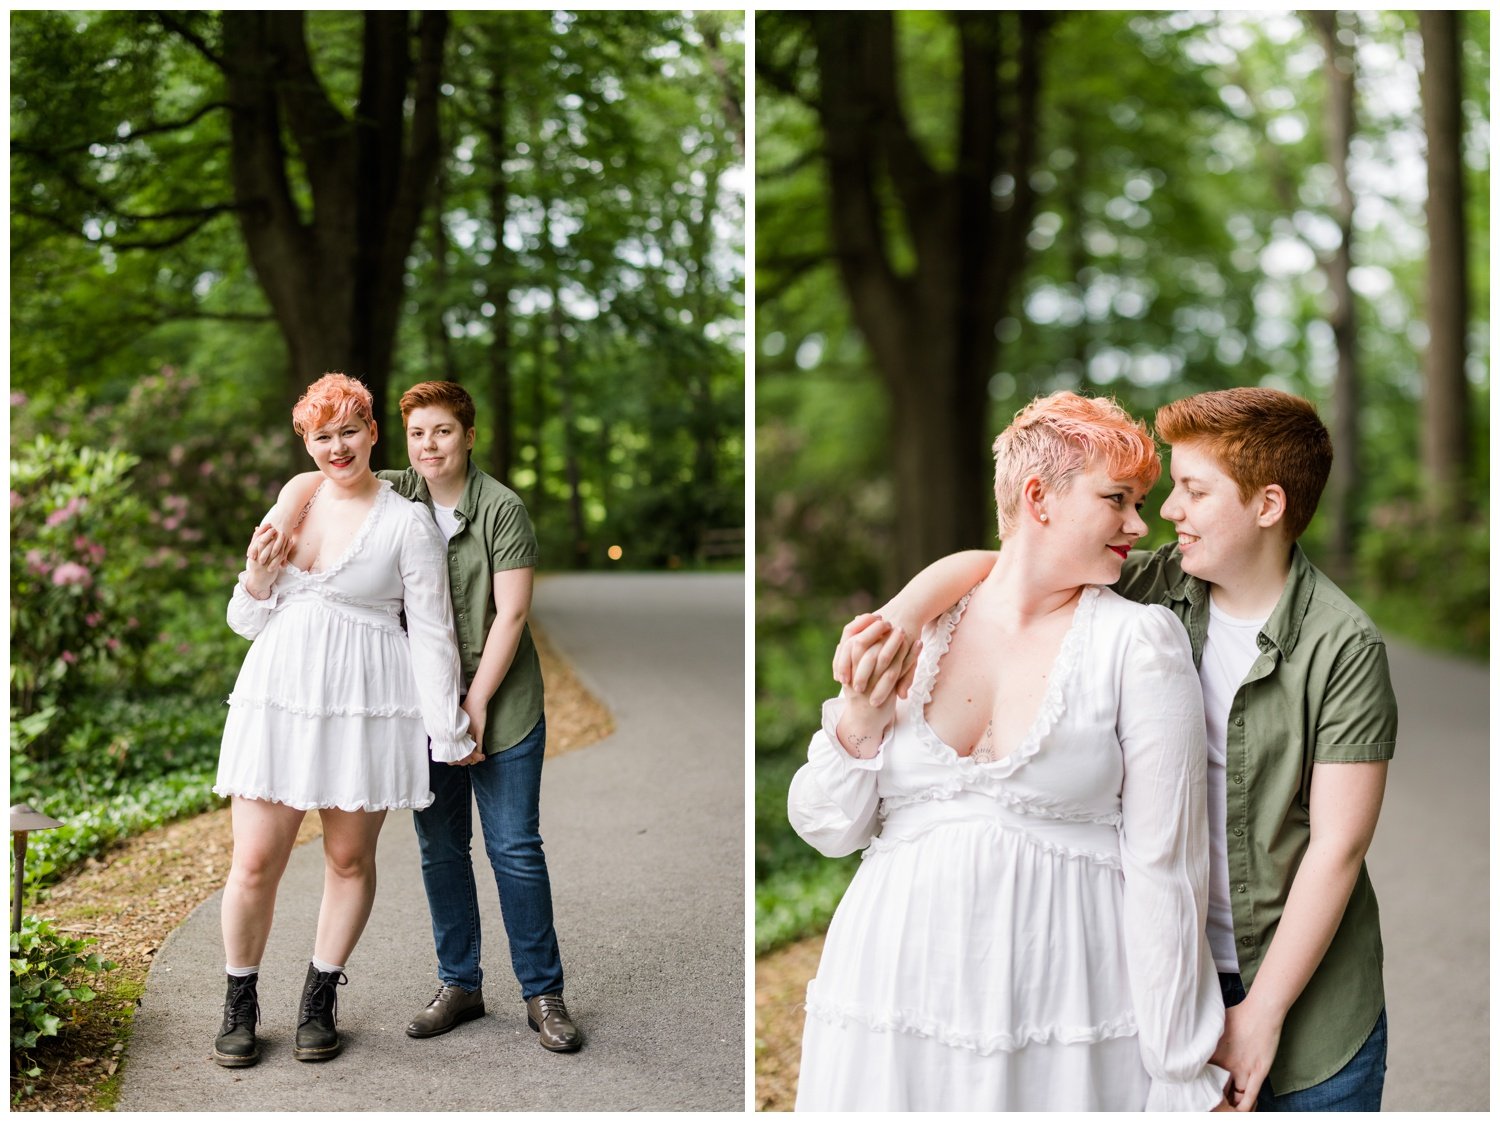 Queer-Engagement-Photos-Longwood-Gardens-Philly-Photographer-LGBTQ-10.jpg